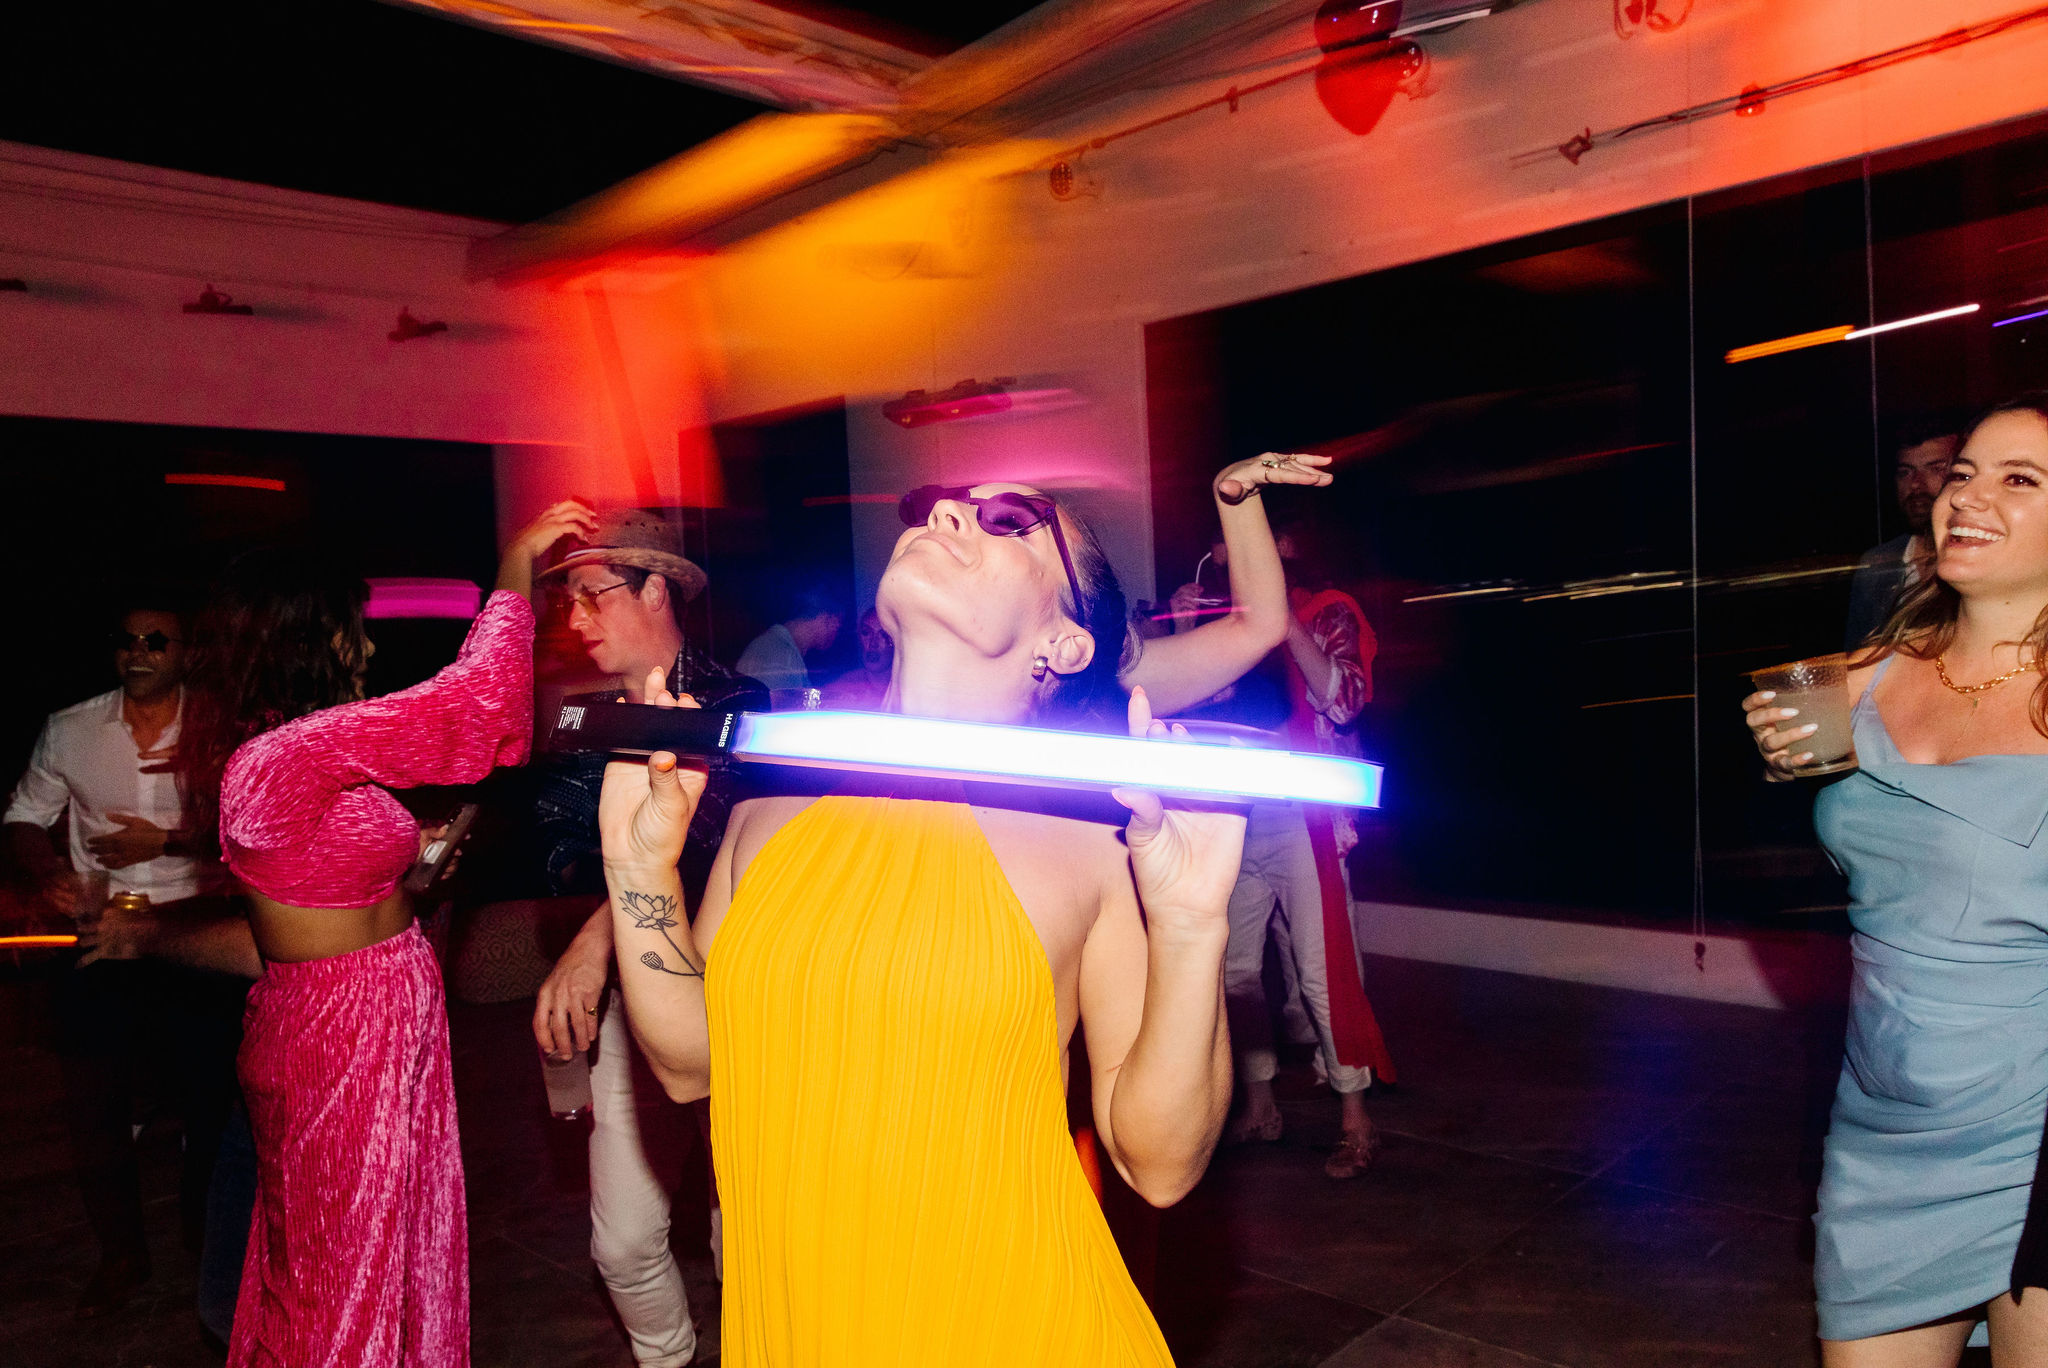 blurry photo style destination wedding dance party light sabor dance floor colorful yellow bridal after party dress